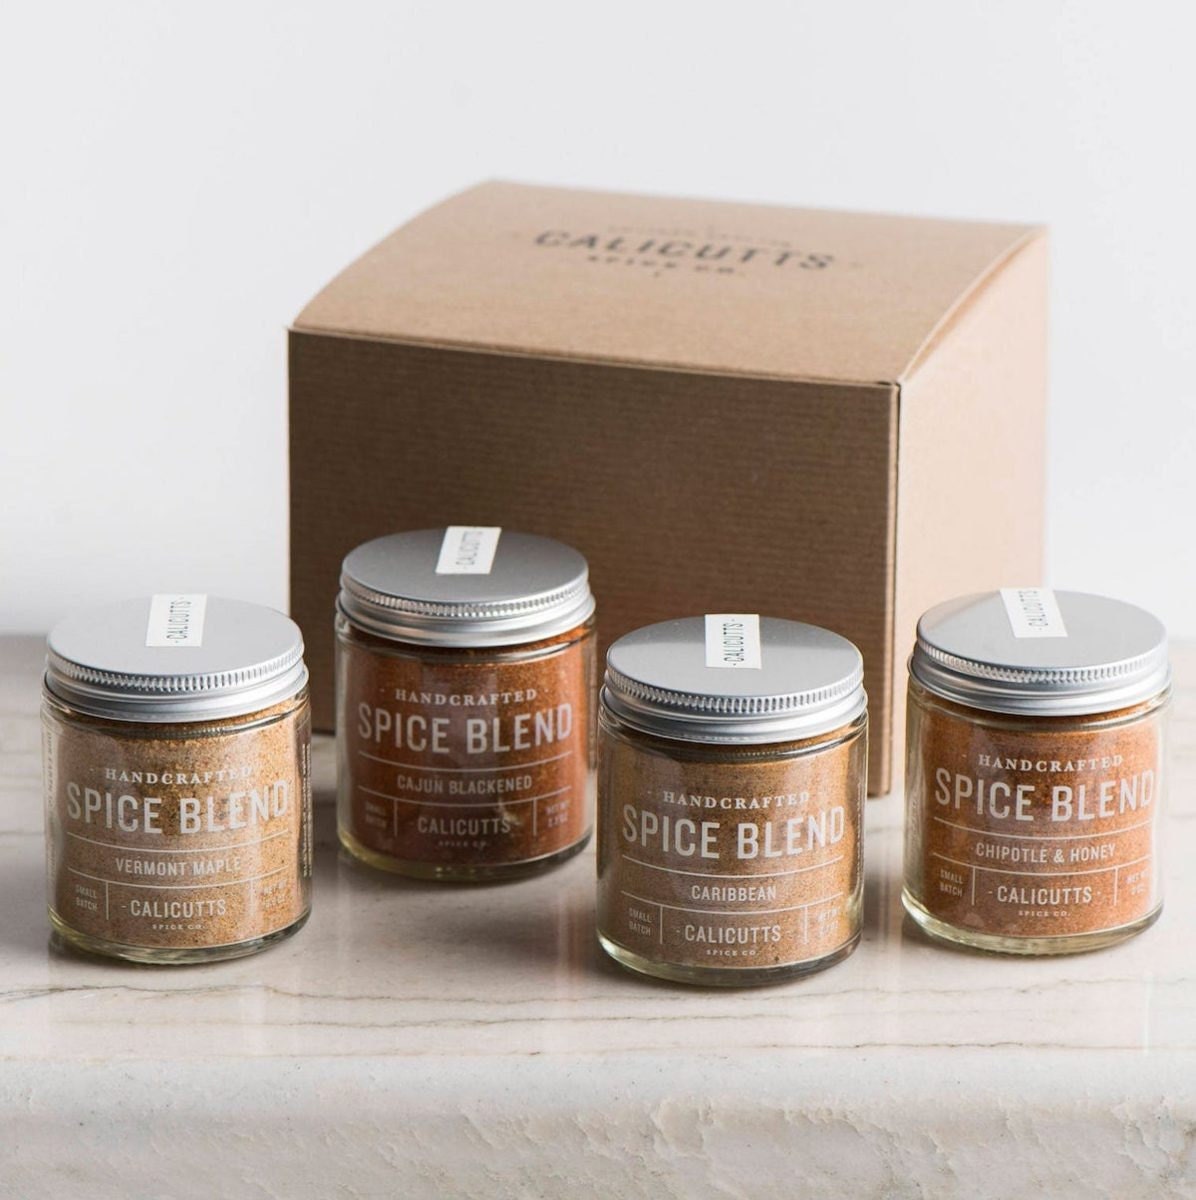 "Grill Master" spice gift set from Calicutts Spice Co.